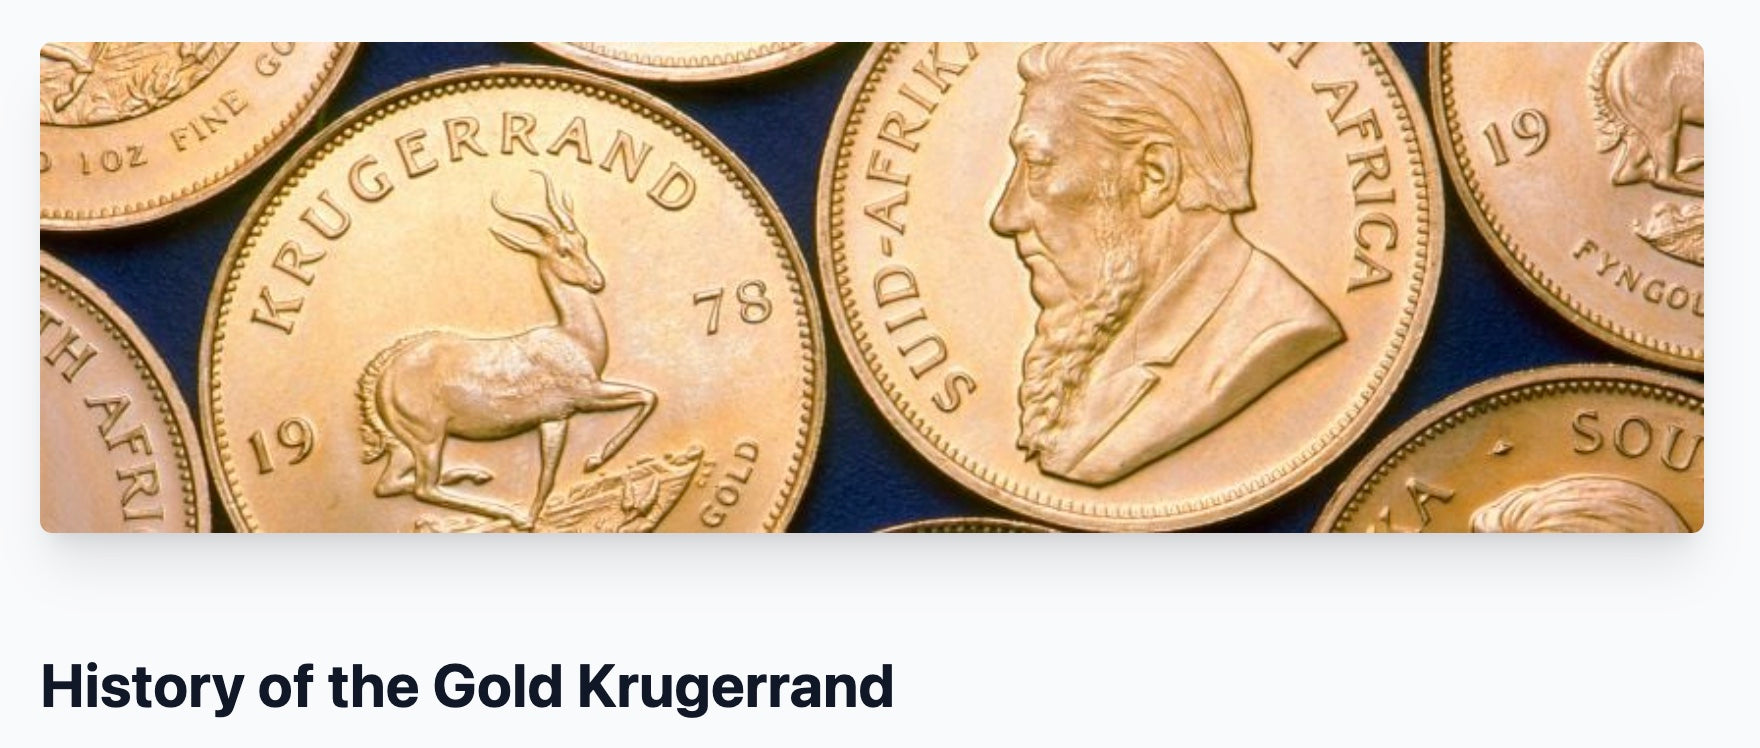 What is a Krugerrand?